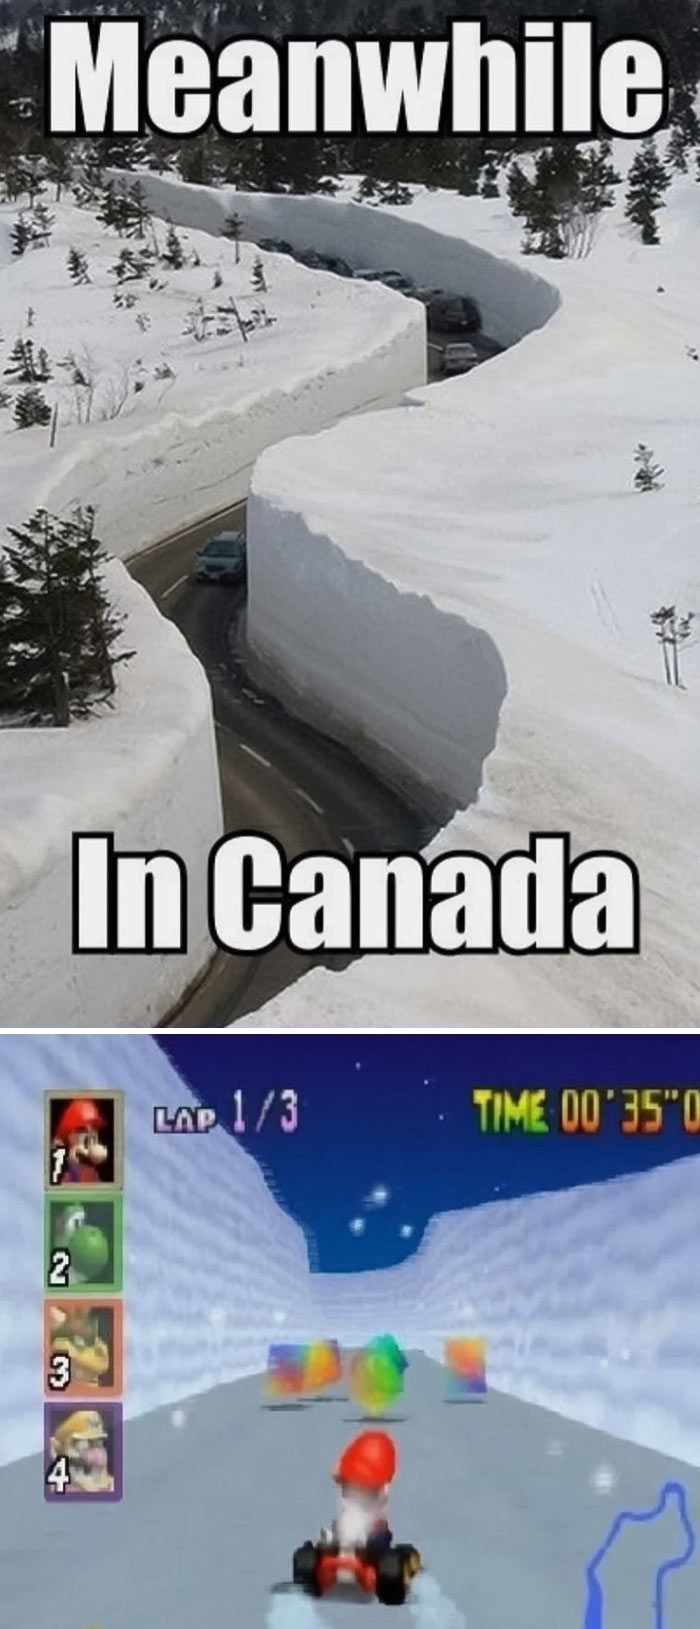 Mario Kart game track compared to Canada road in winter